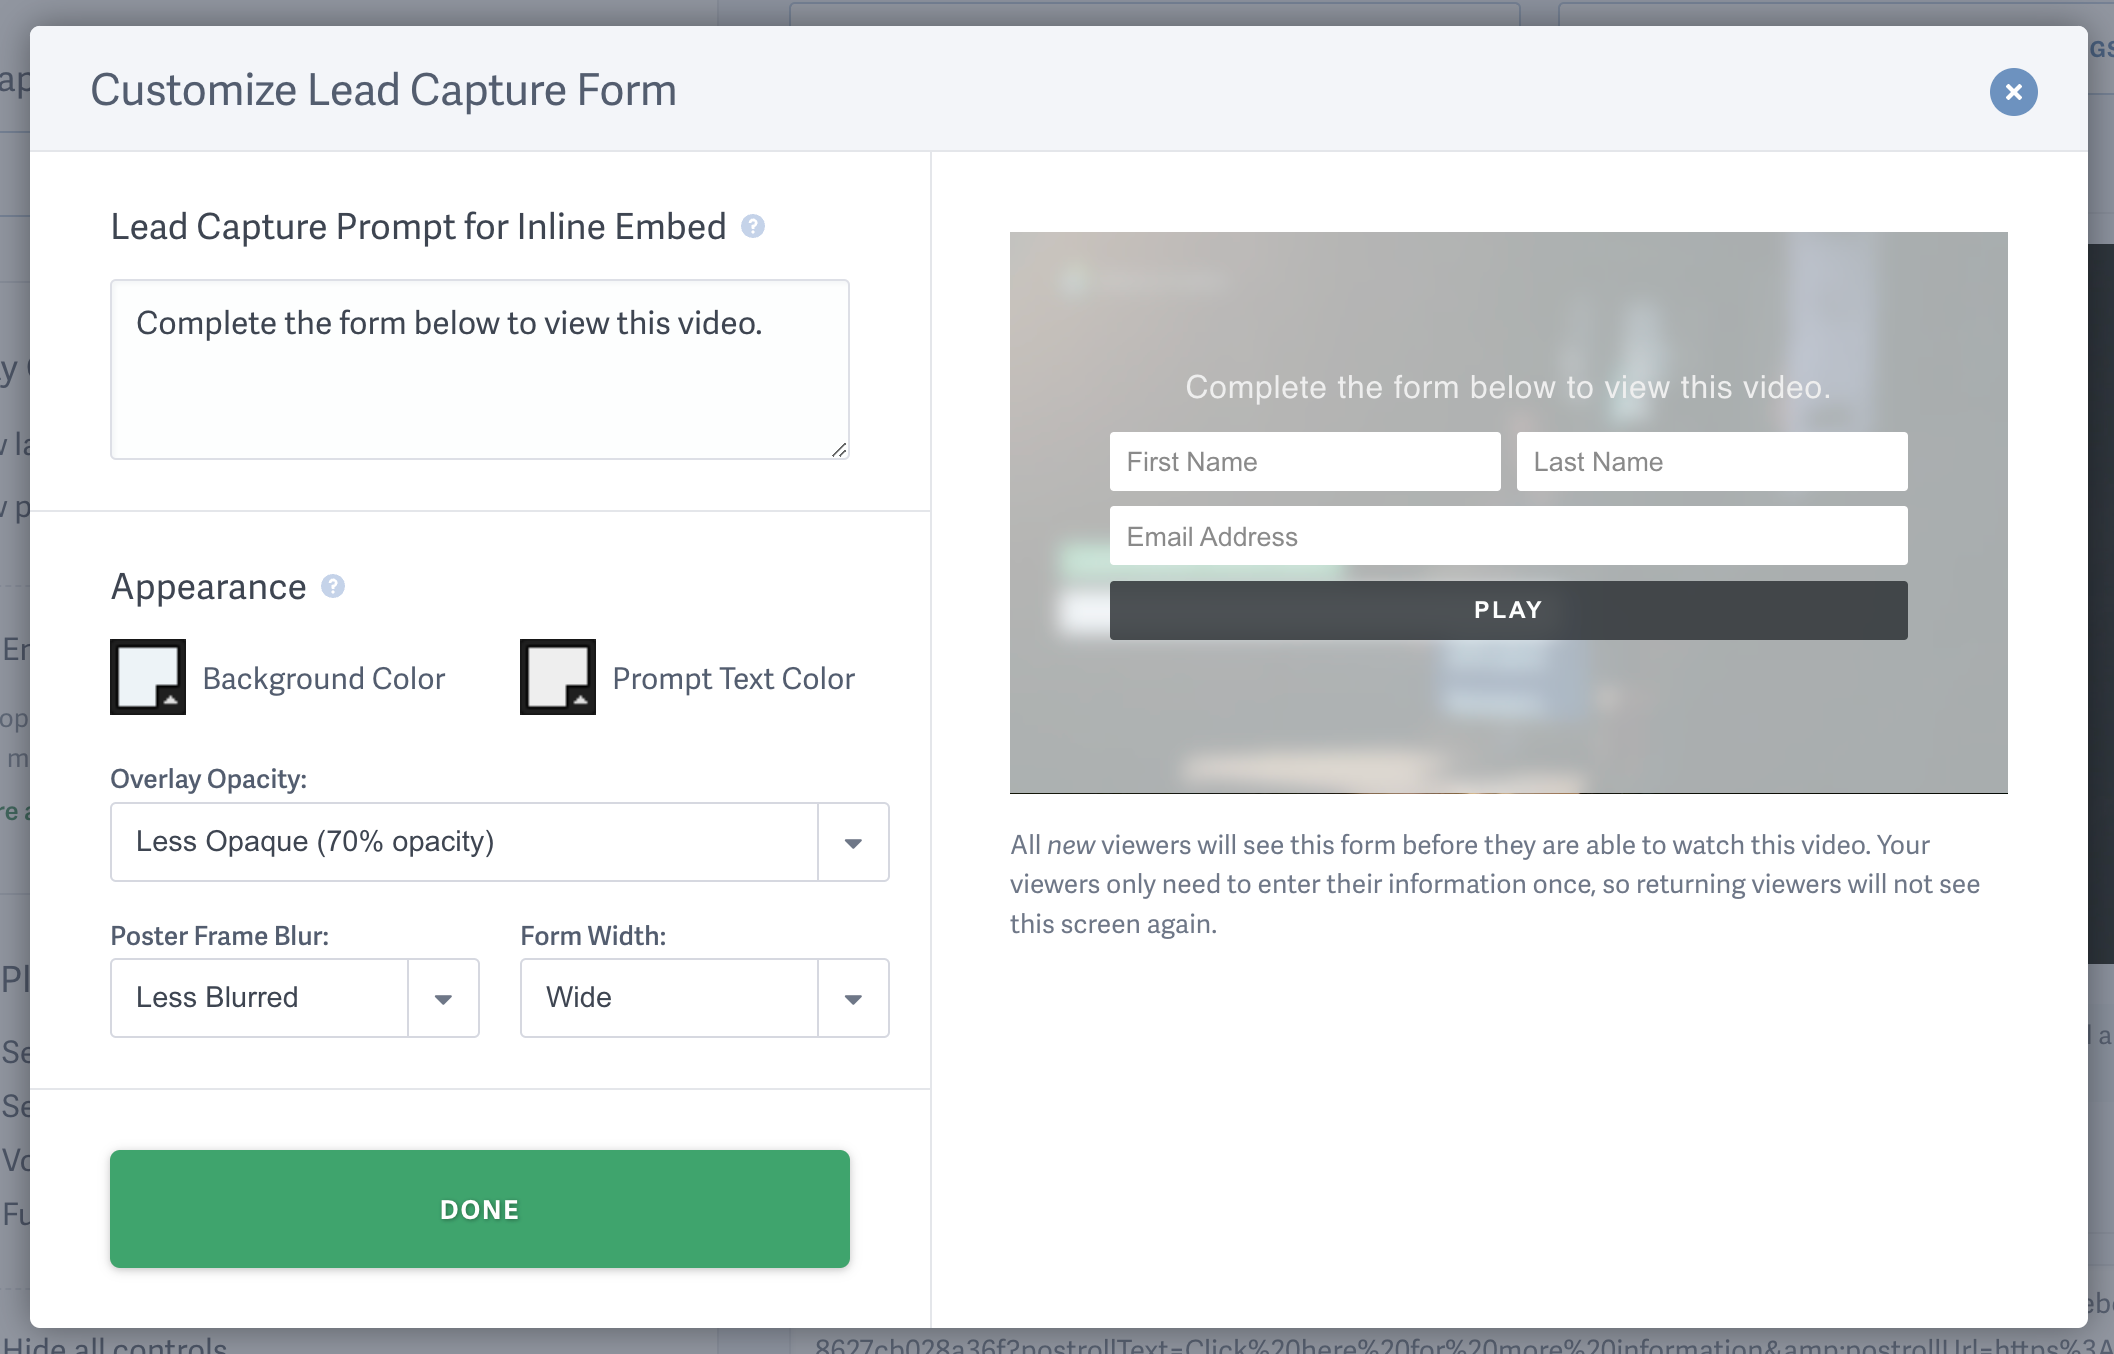 Customize Lead Capture Form For Embeds